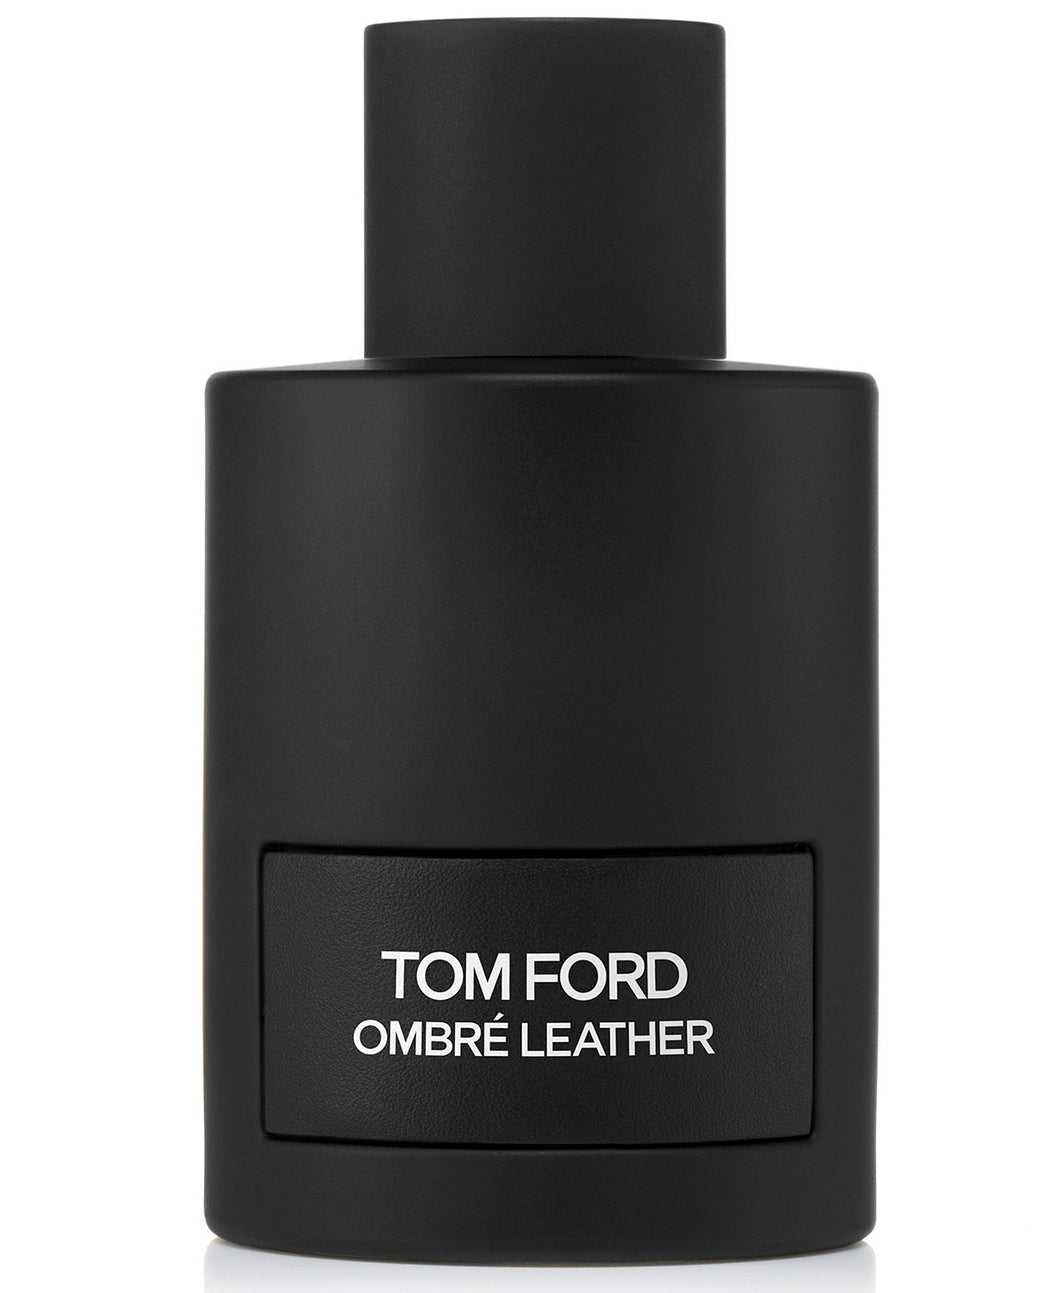 tom ford ombre leather edp 3.4oz for mens - alwaysspecialgifts.com